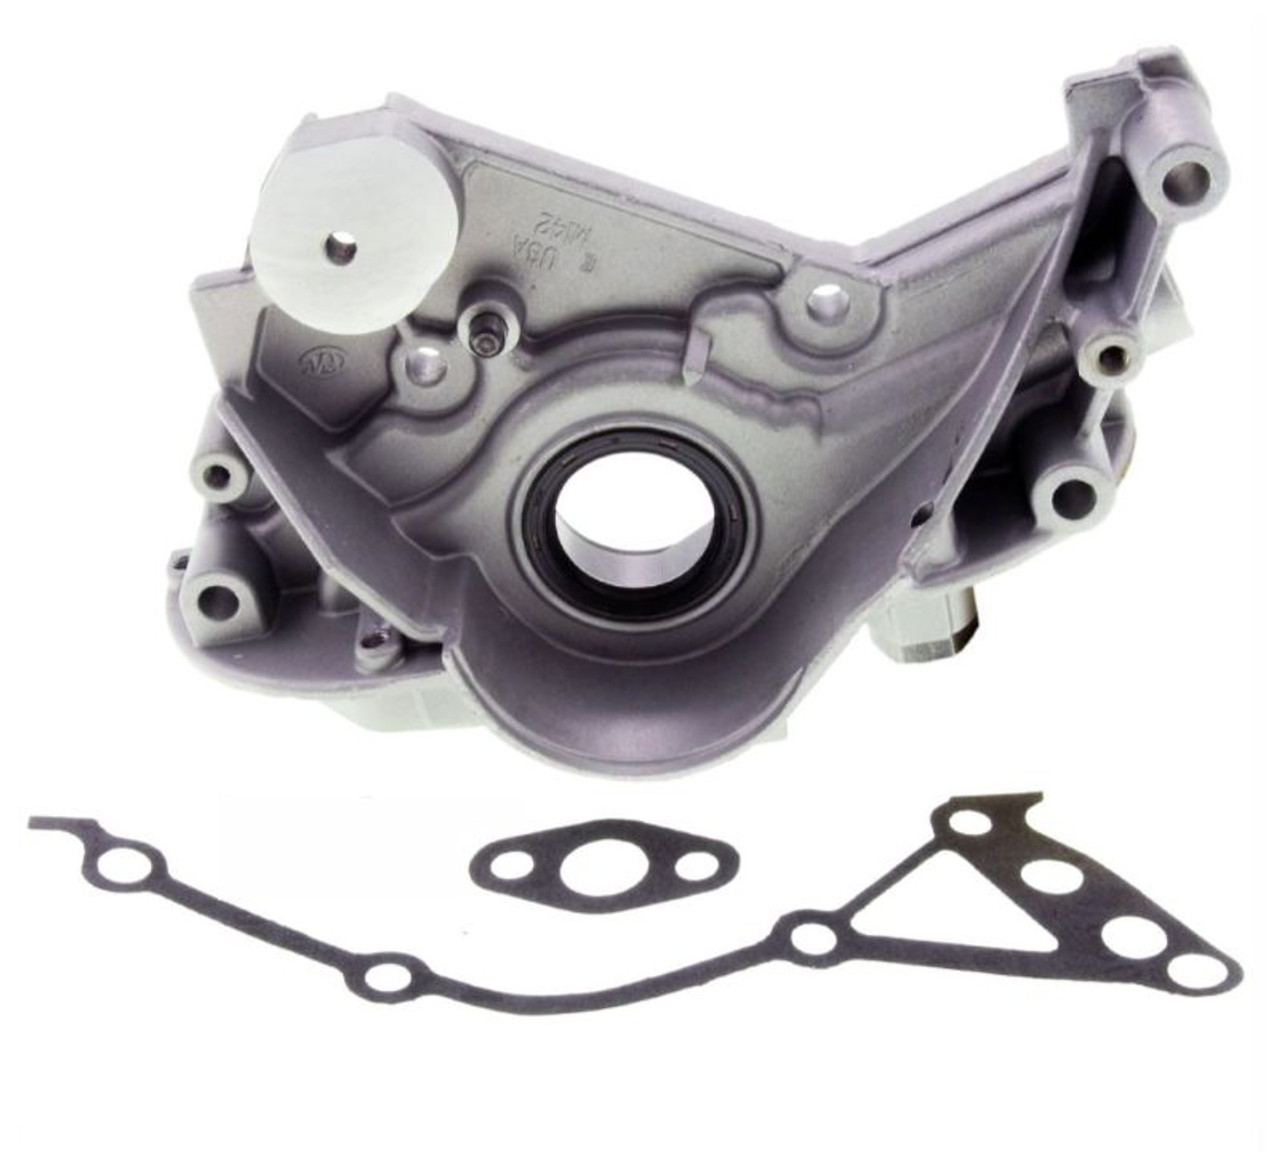 Oil Pump - 1990 Plymouth Voyager 3.0L (EP142.C28)